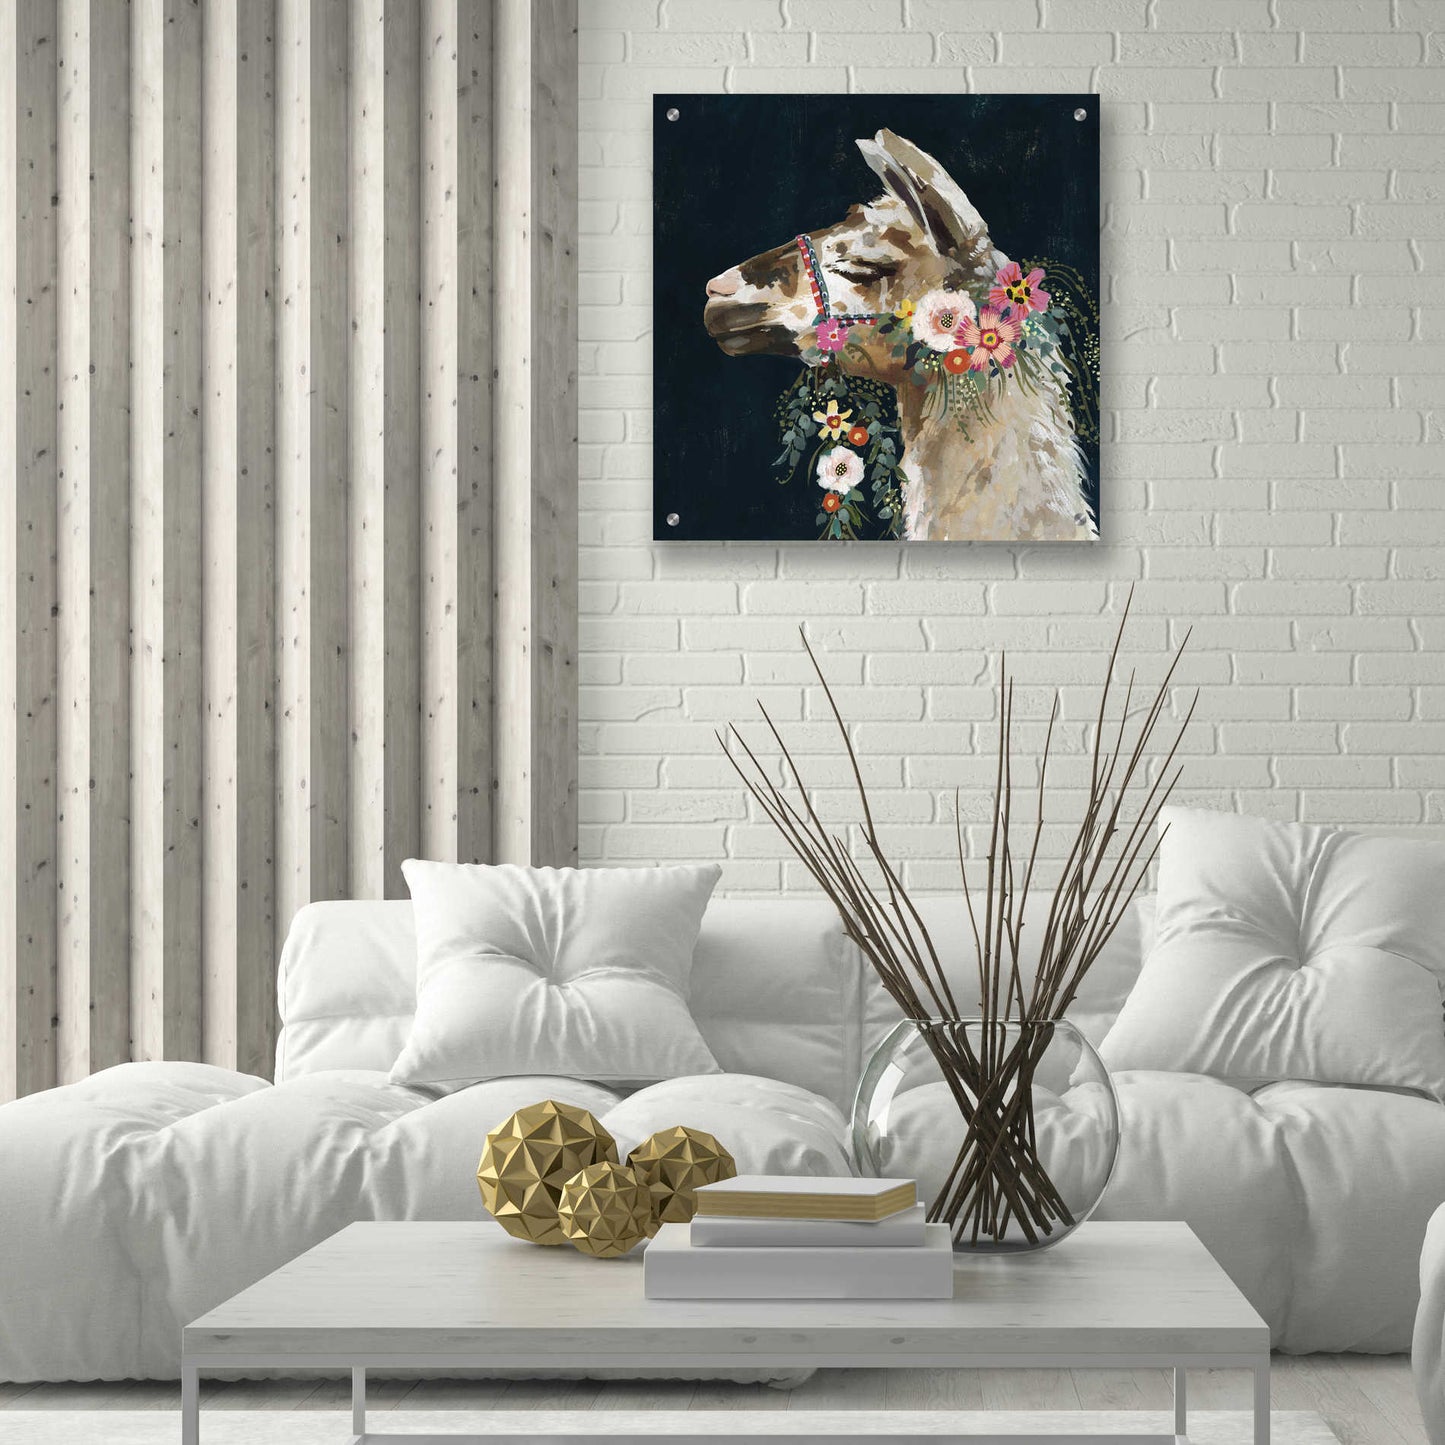 Epic Art 'Lovely Llama II' by Victoria Borges, Acrylic Glass Wall Art,24x24